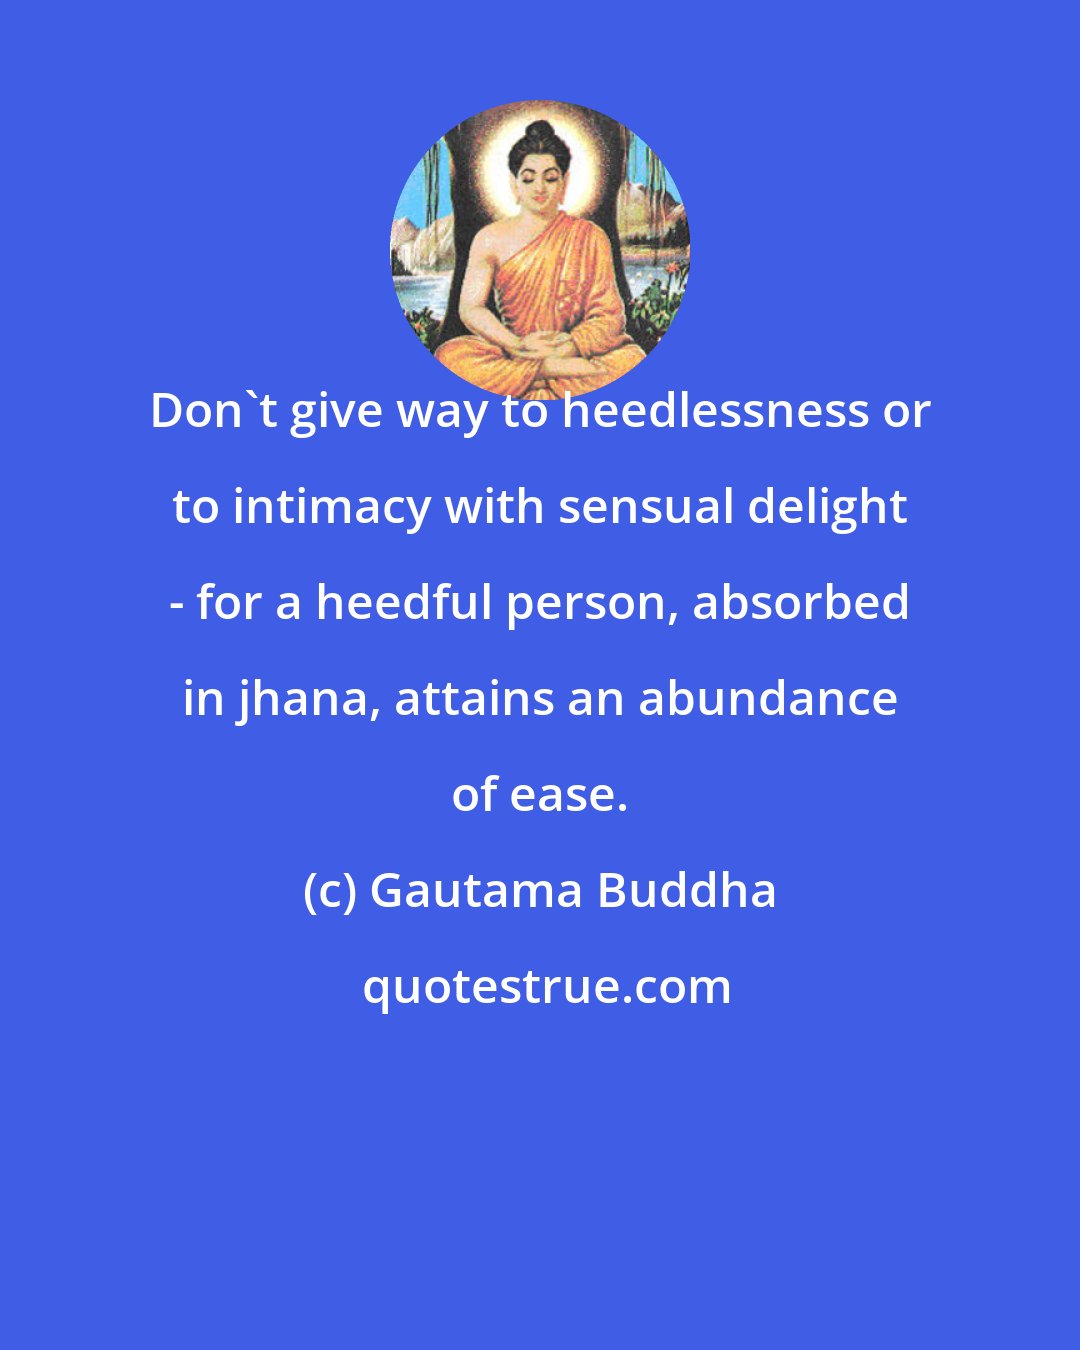 Gautama Buddha: Don't give way to heedlessness or to intimacy with sensual delight - for a heedful person, absorbed in jhana, attains an abundance of ease.